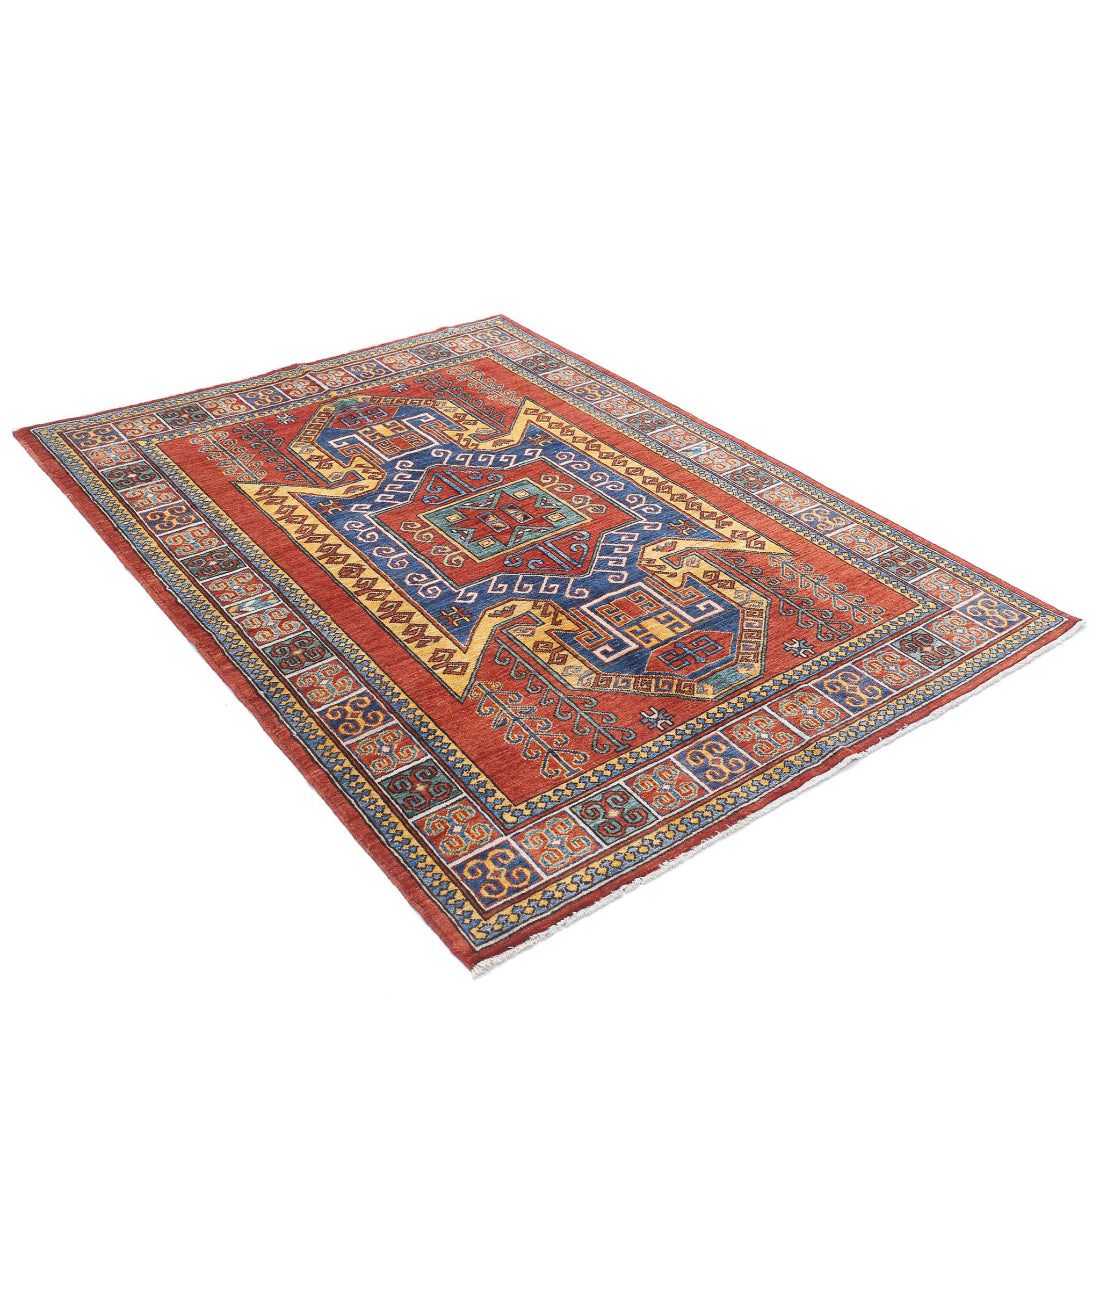 Hand Knotted Nomadic Caucasian Humna Wool Rug - 4'10'' x 6'7'' 4'10'' x 6'7'' (145 X 198) / Red / Multi